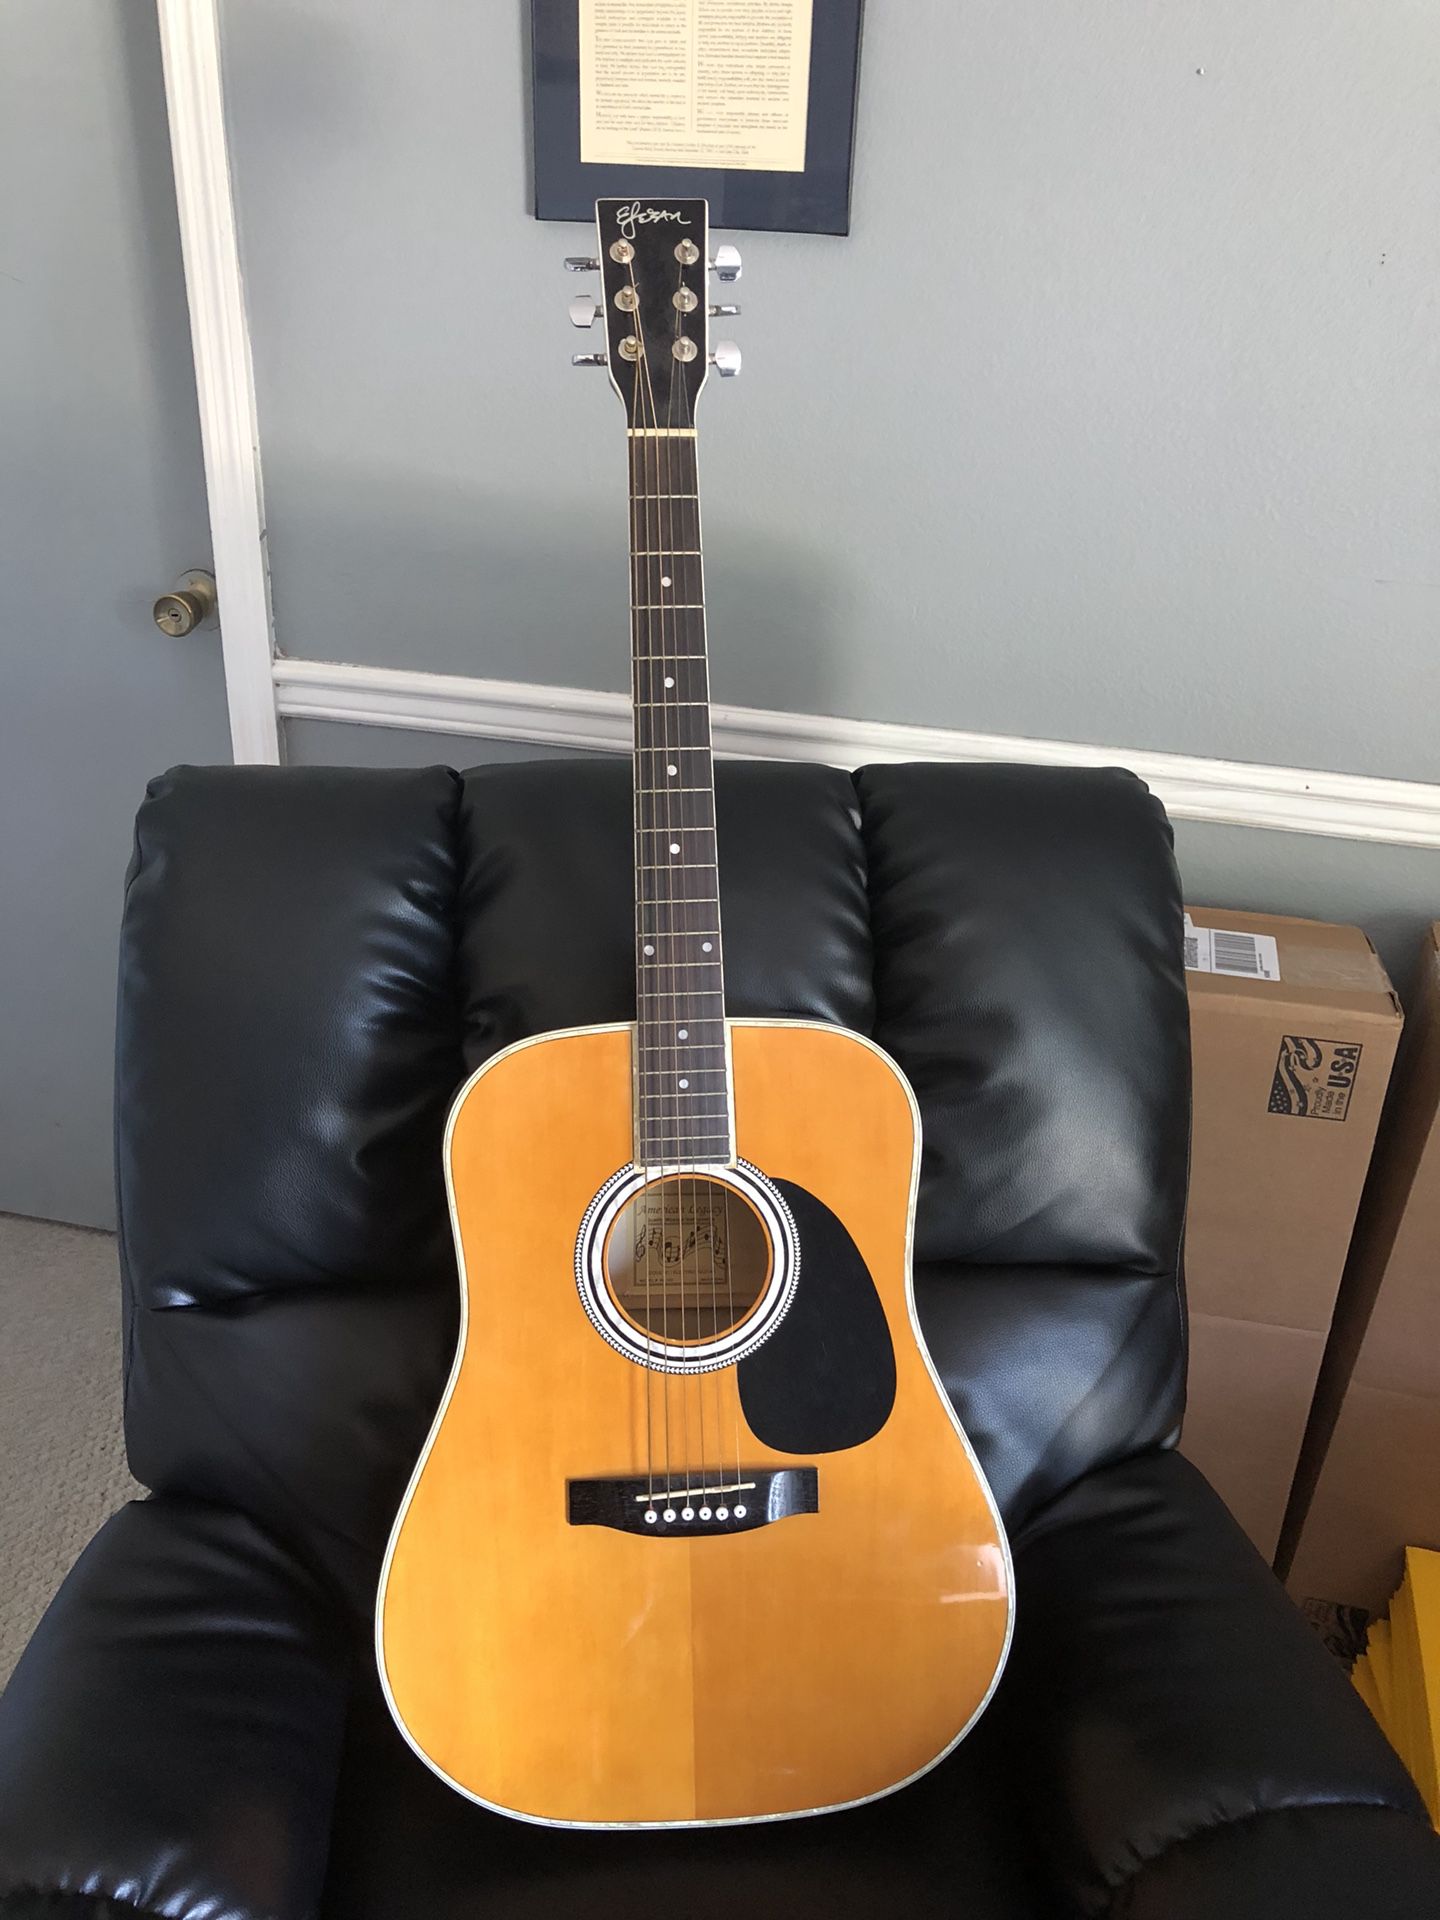 Beautiful Guitar in perfect condition with Amp plugin